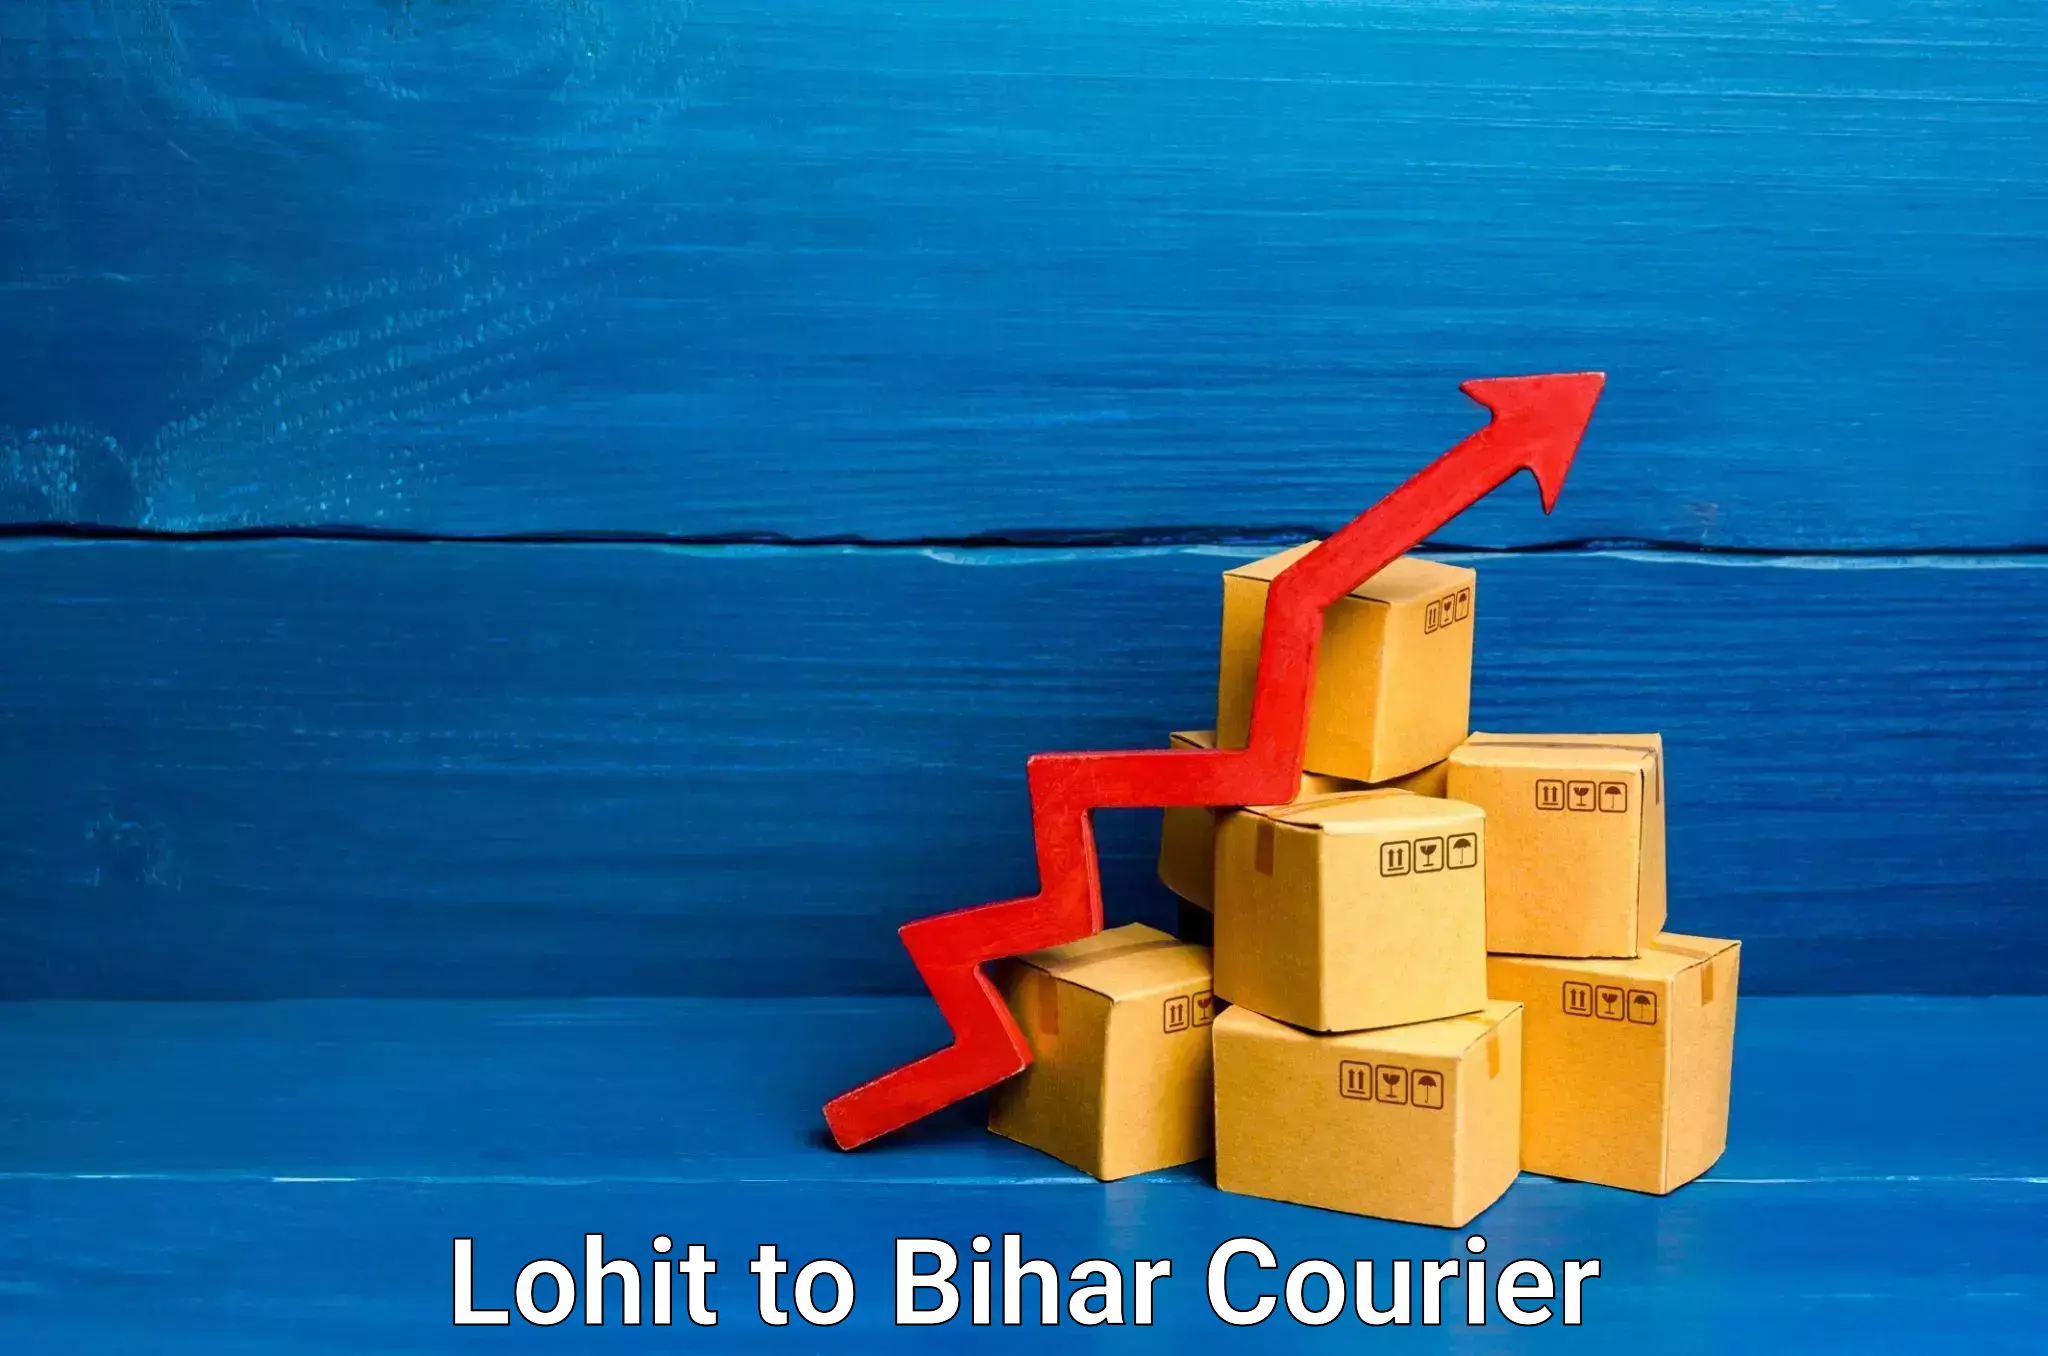 Flexible delivery schedules Lohit to Bihar